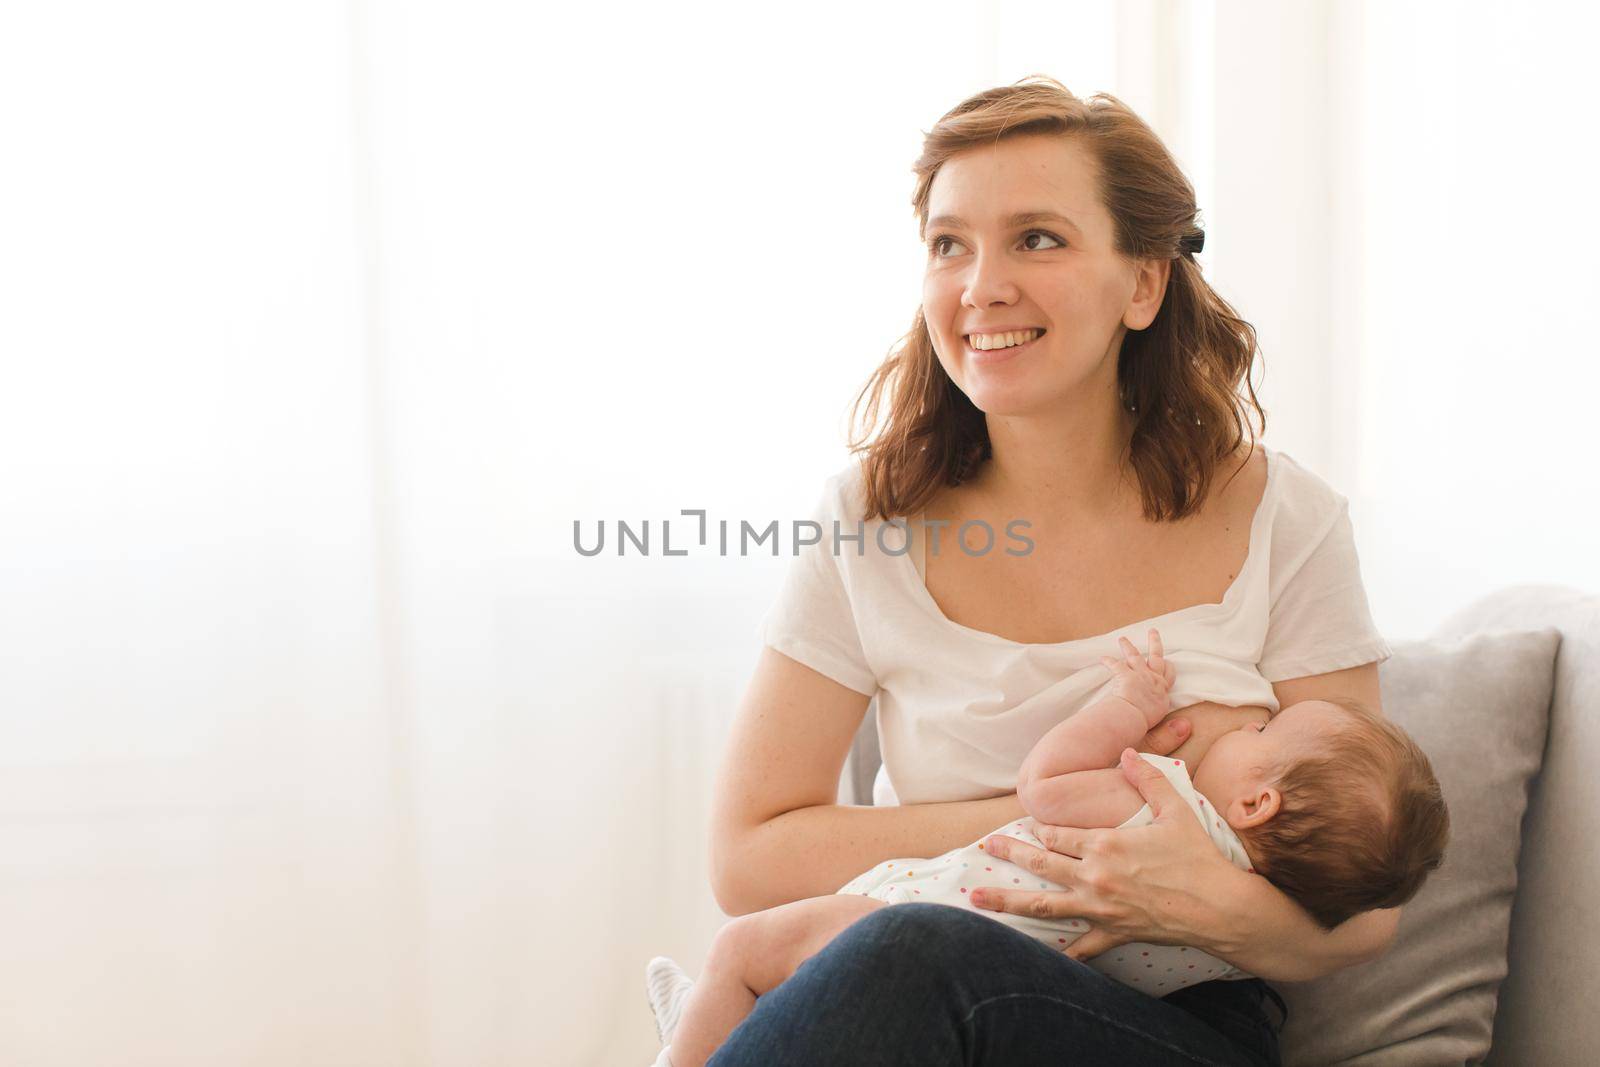 Cheerful young woman breastfeeding infant child at home.